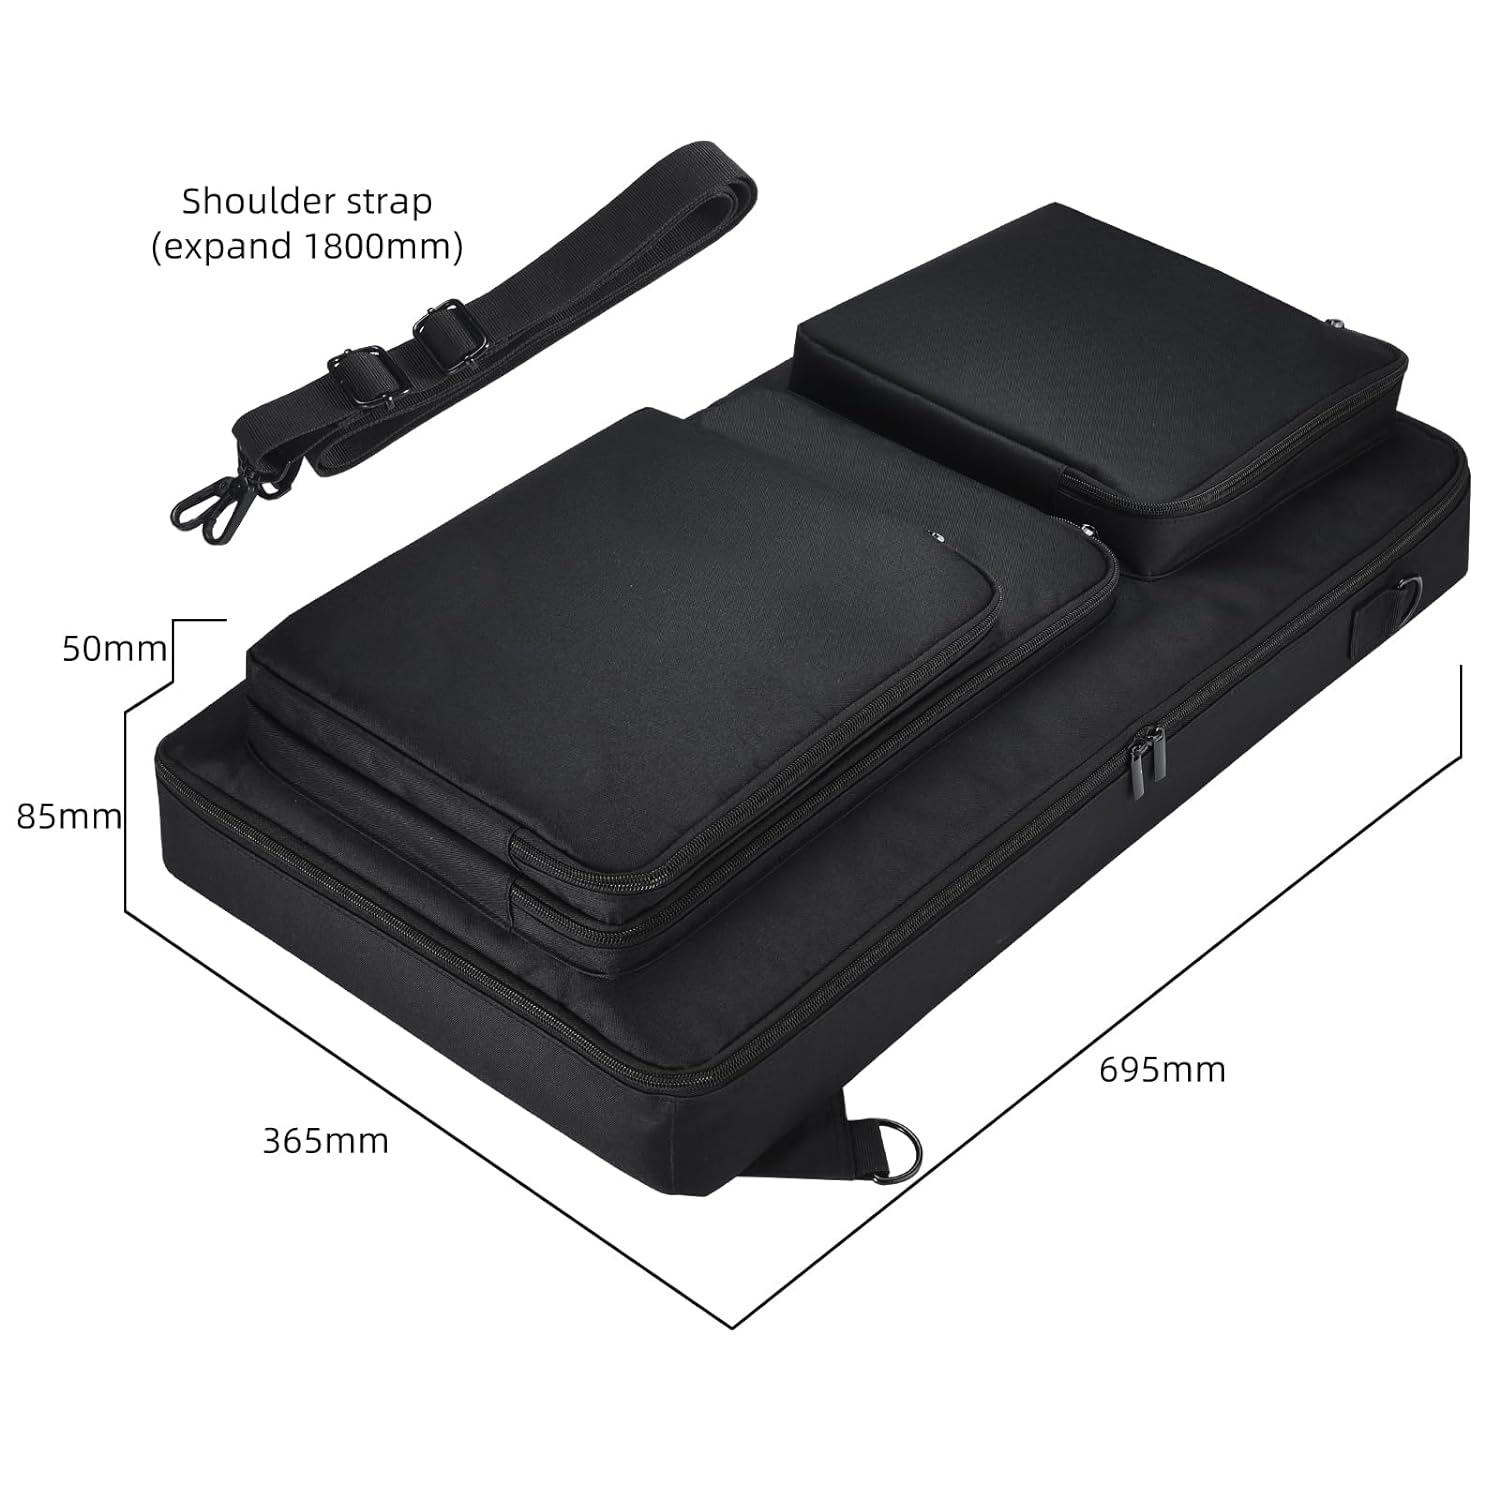 rokeblau Portable Storage Case for Pioneer DDJ-FLX6 DDJ-SX3/SX2/SX, Protective Bag With Adjustable Shoulder Strap, Large Capacity Durable Case For DJ Console, Laptop and Accessories (black)